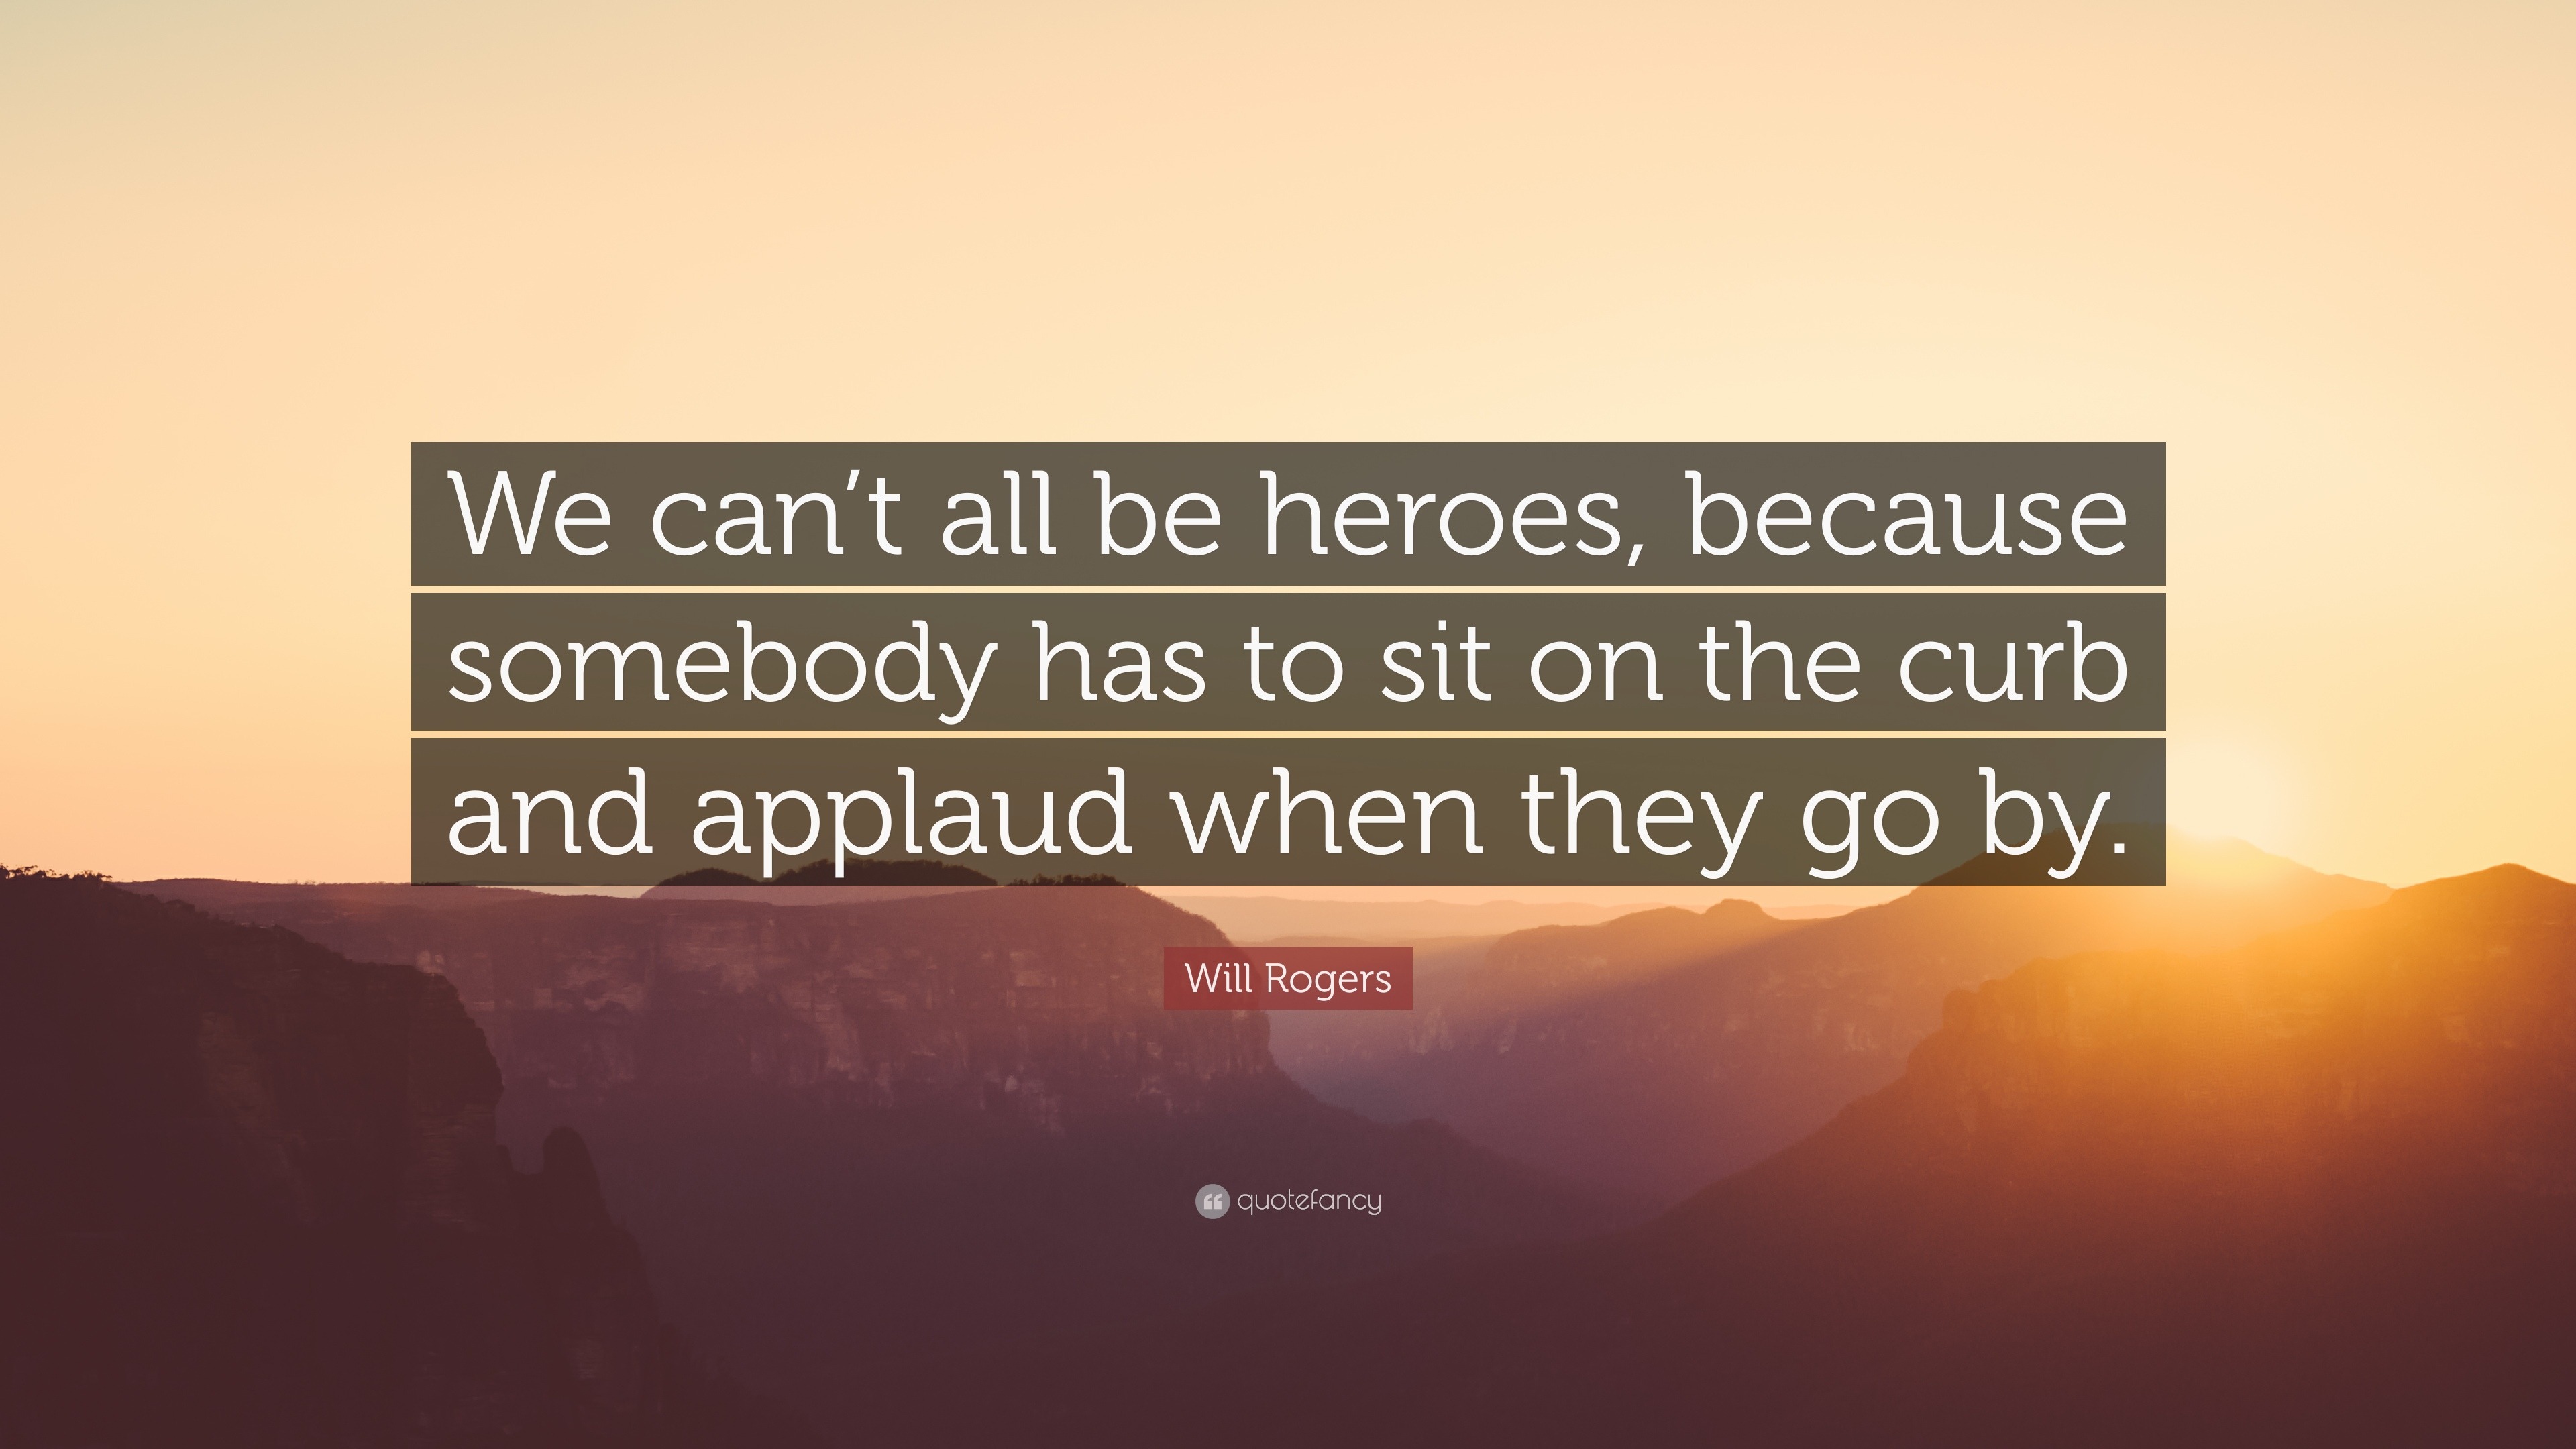 company of heroes quote